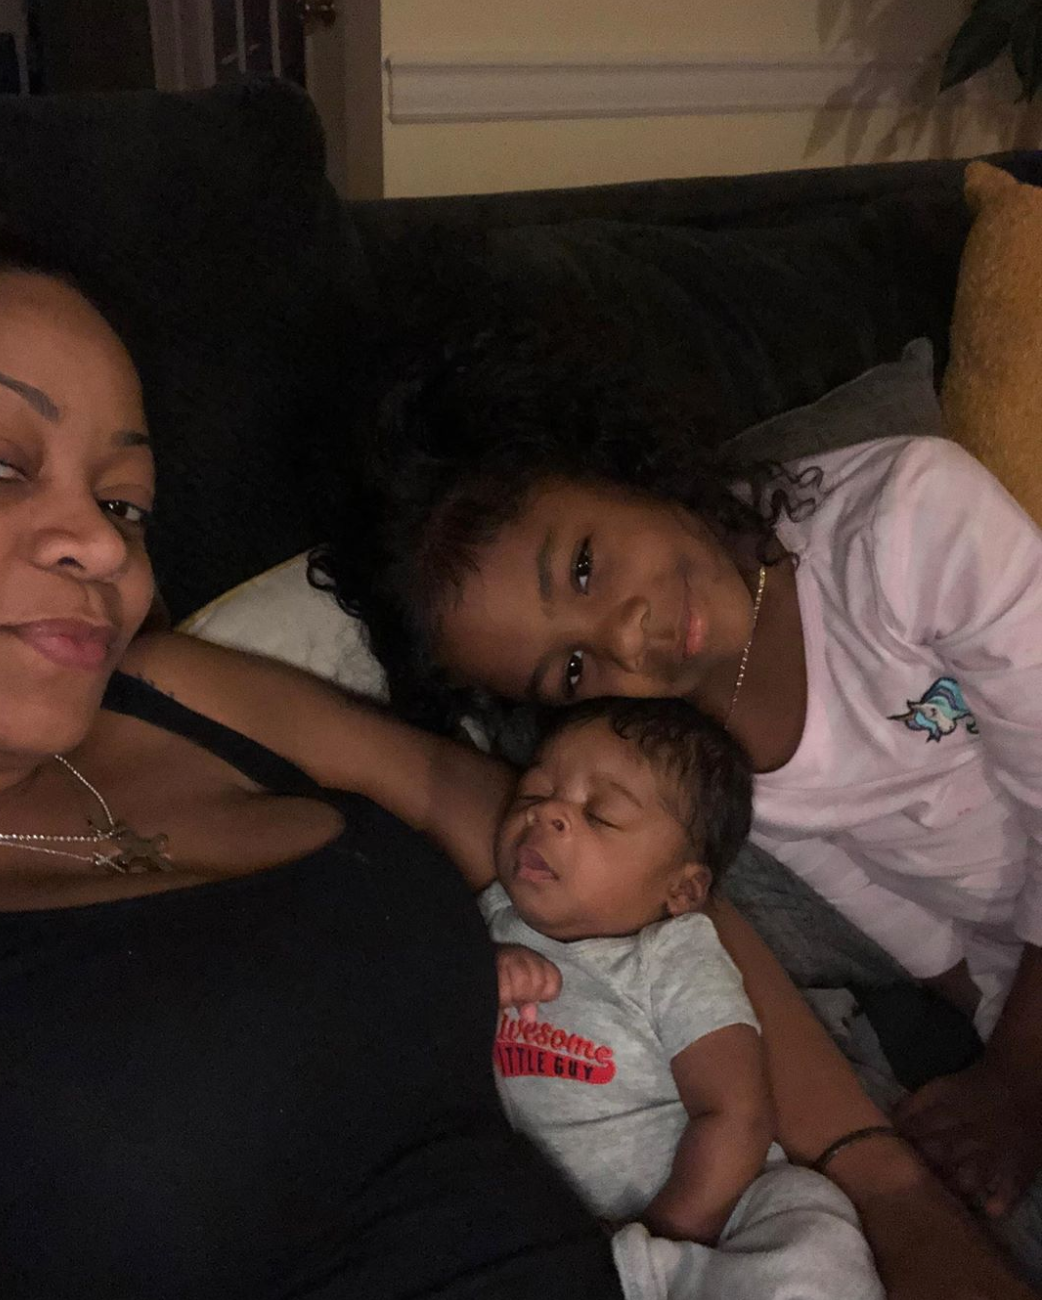 Aww! Let These Sweet Photos Of LaTavia Roberson and Her Adorable Kids Brighten Your Day